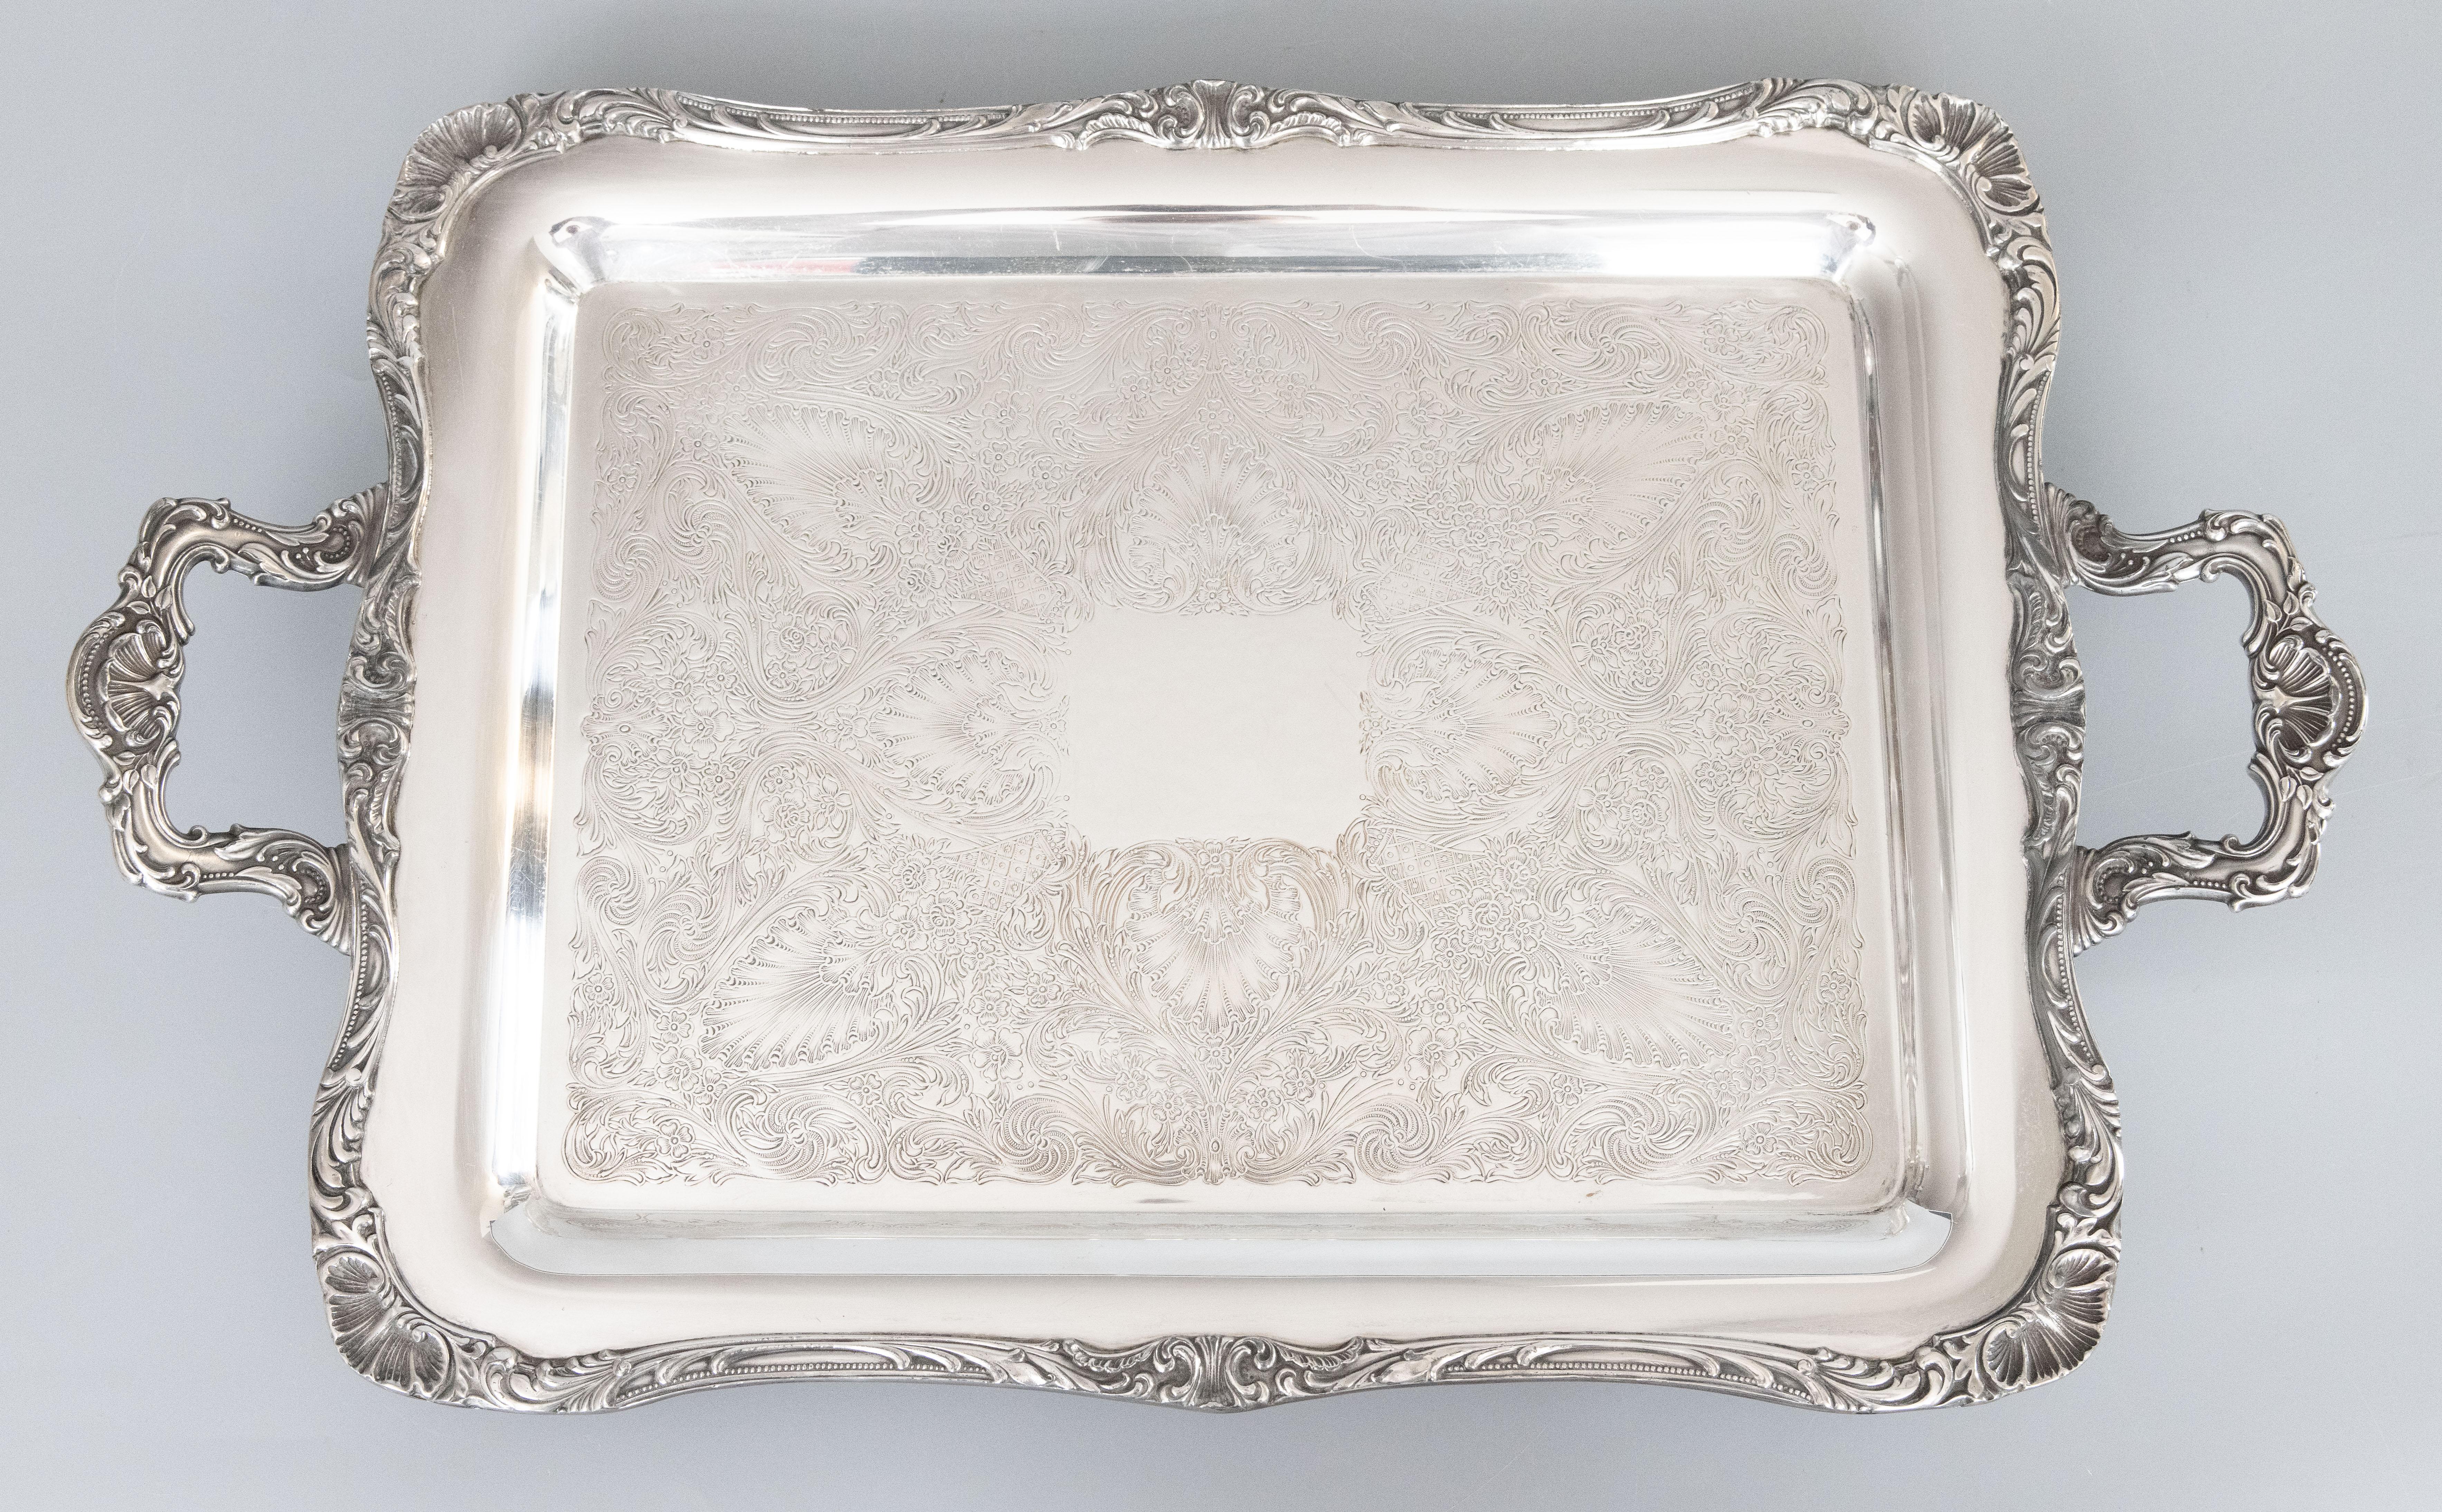 Wm Rogers Silver Plate Footed Rectangular Serving Tray With Handles, circa 1950 For Sale 1